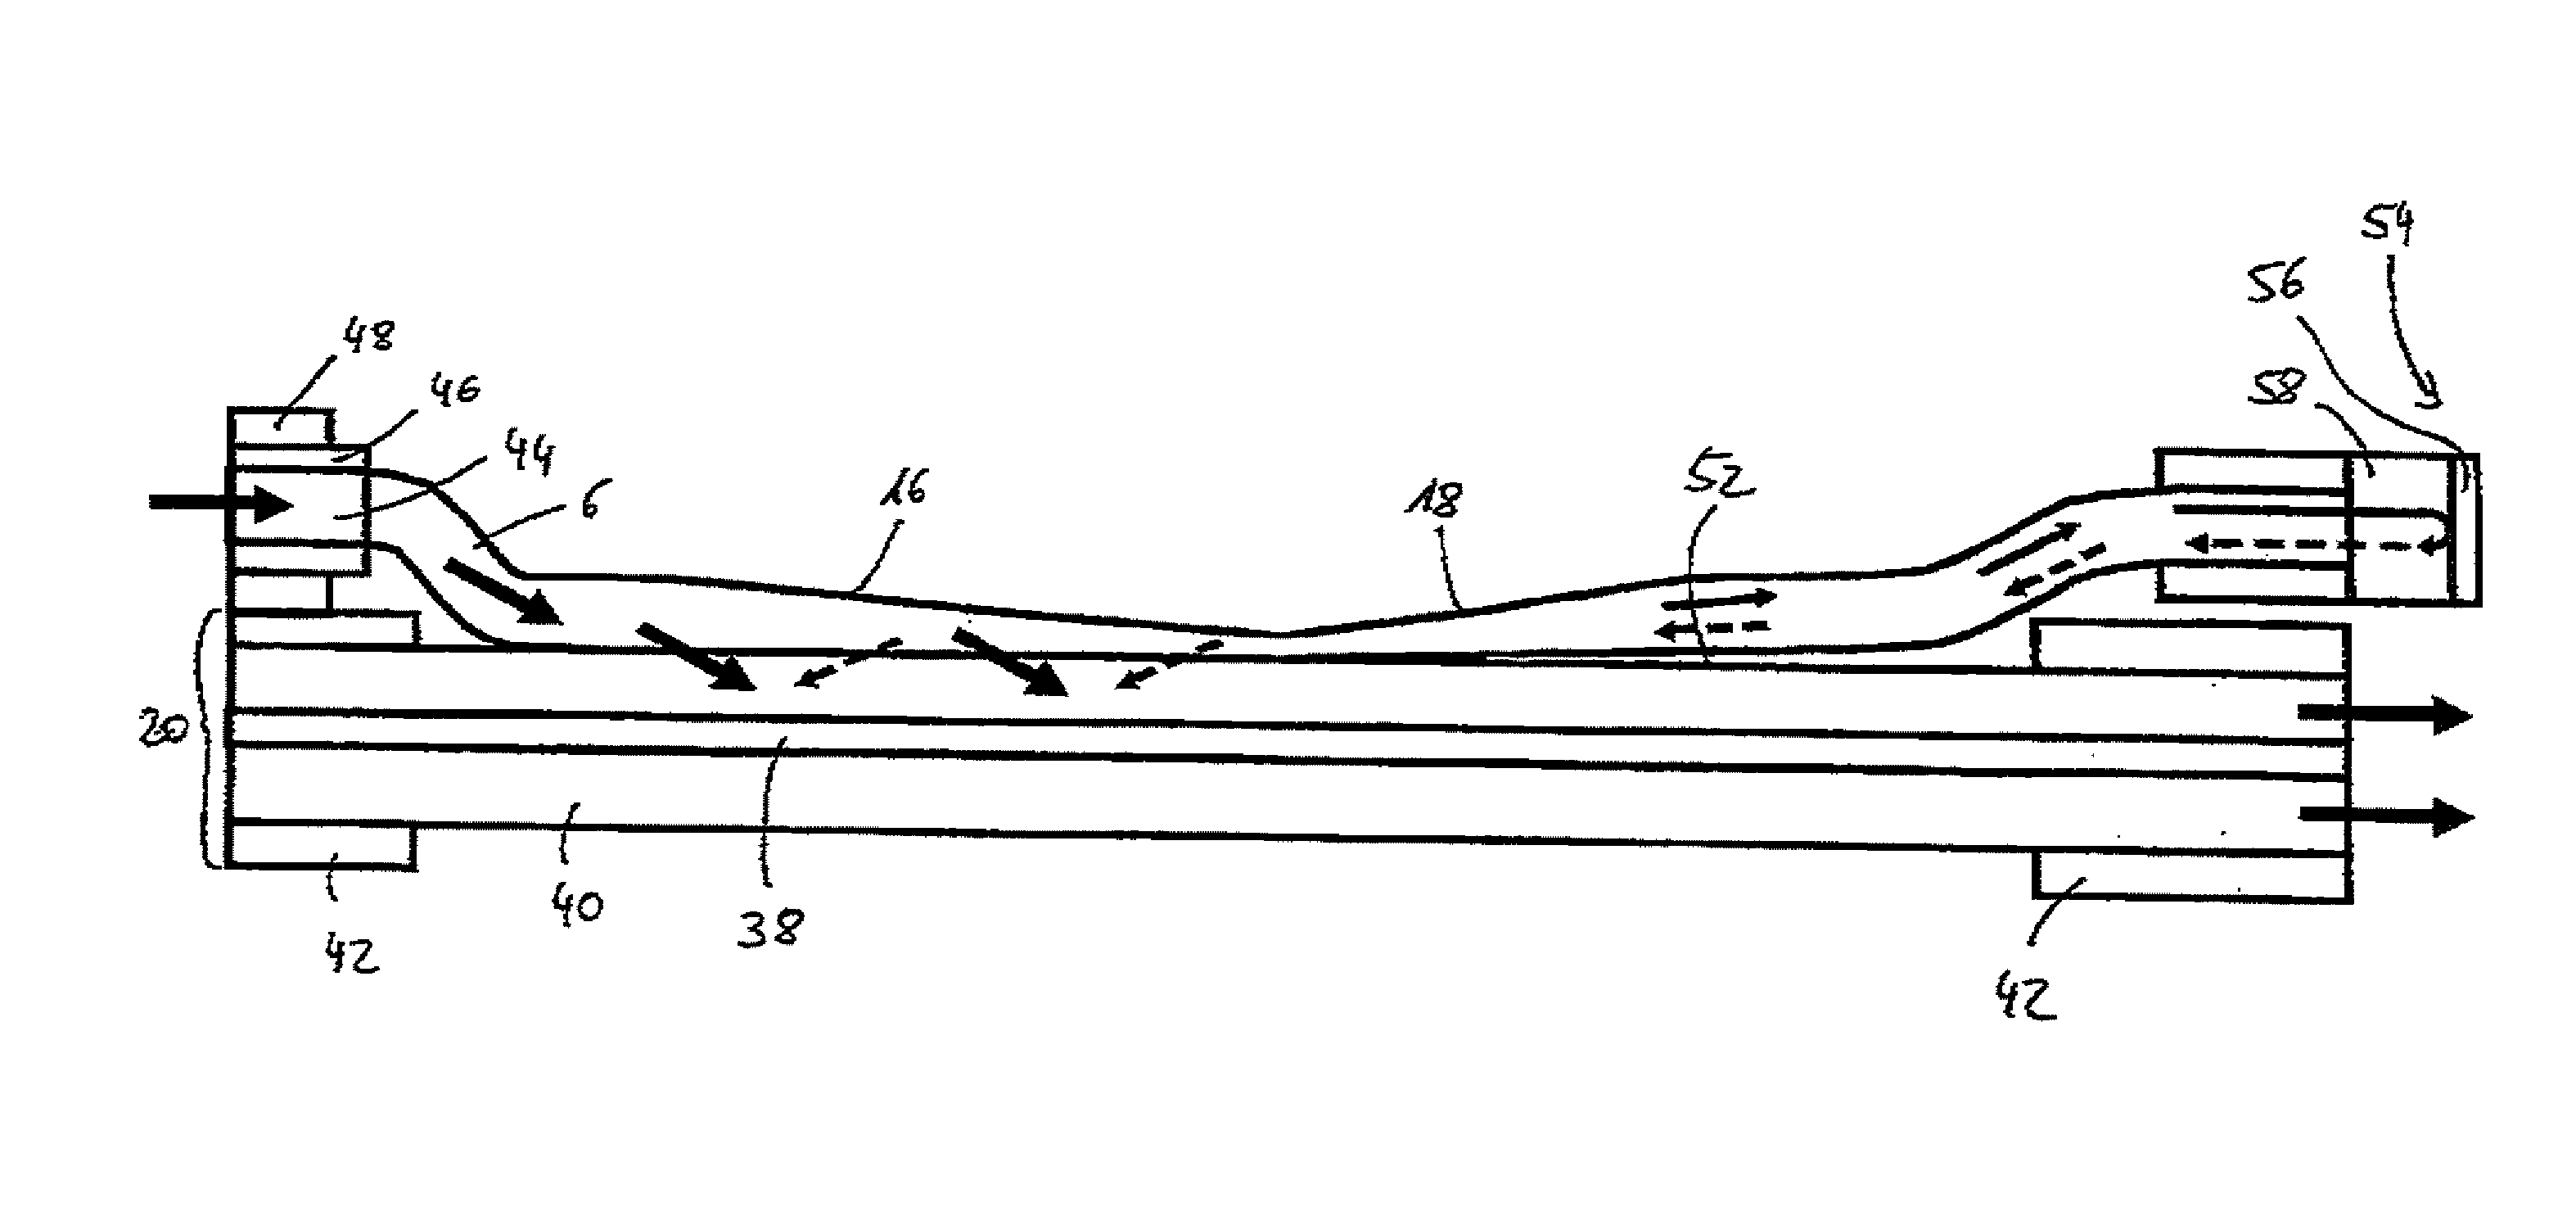 Coupling Arrangement for Non-Axial Transfer of Electromagnetic Radiation